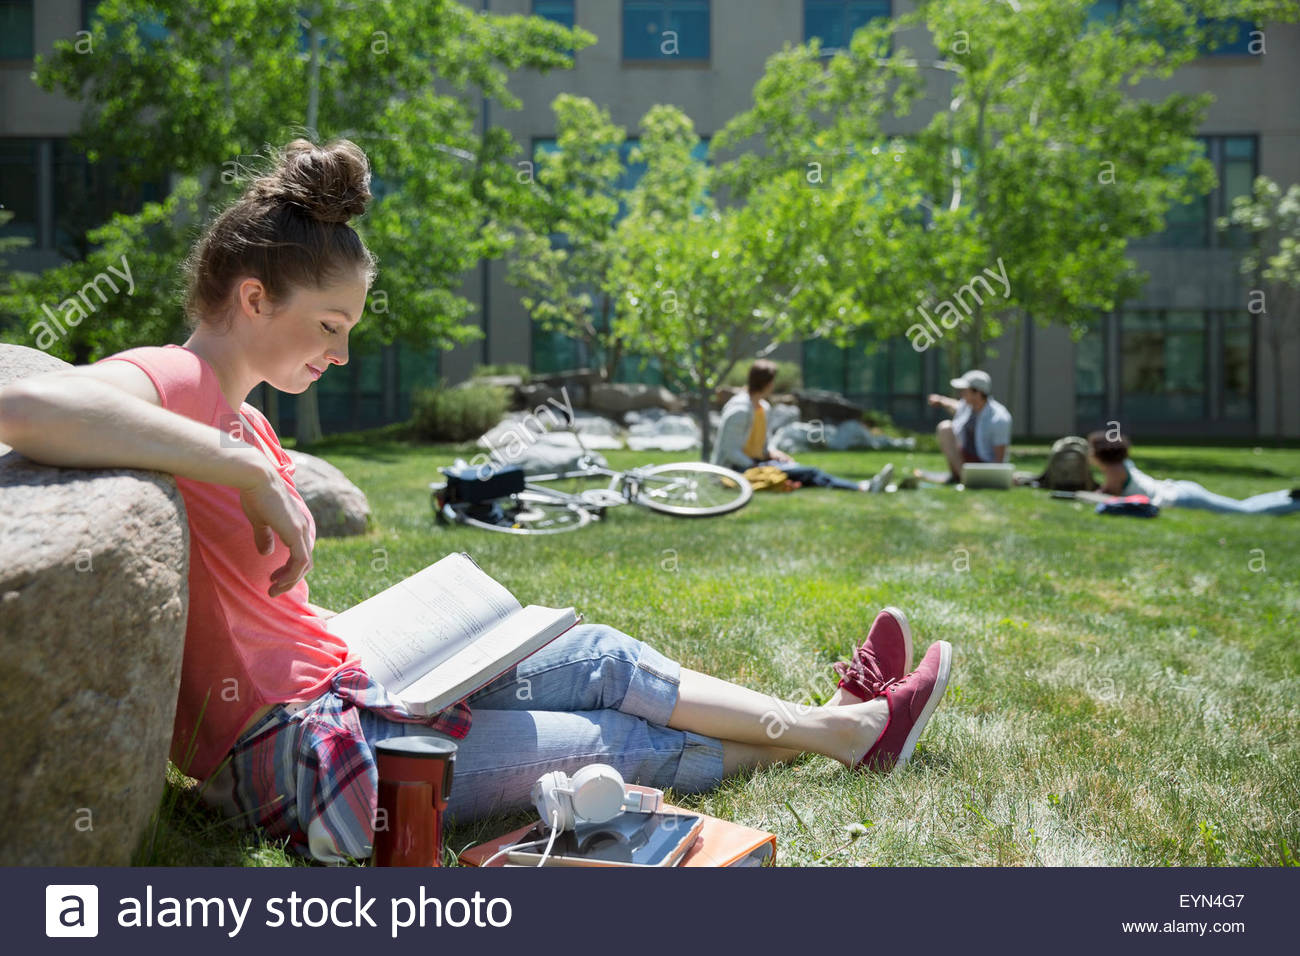 College student studying on sunny campus lawn Stock Photo